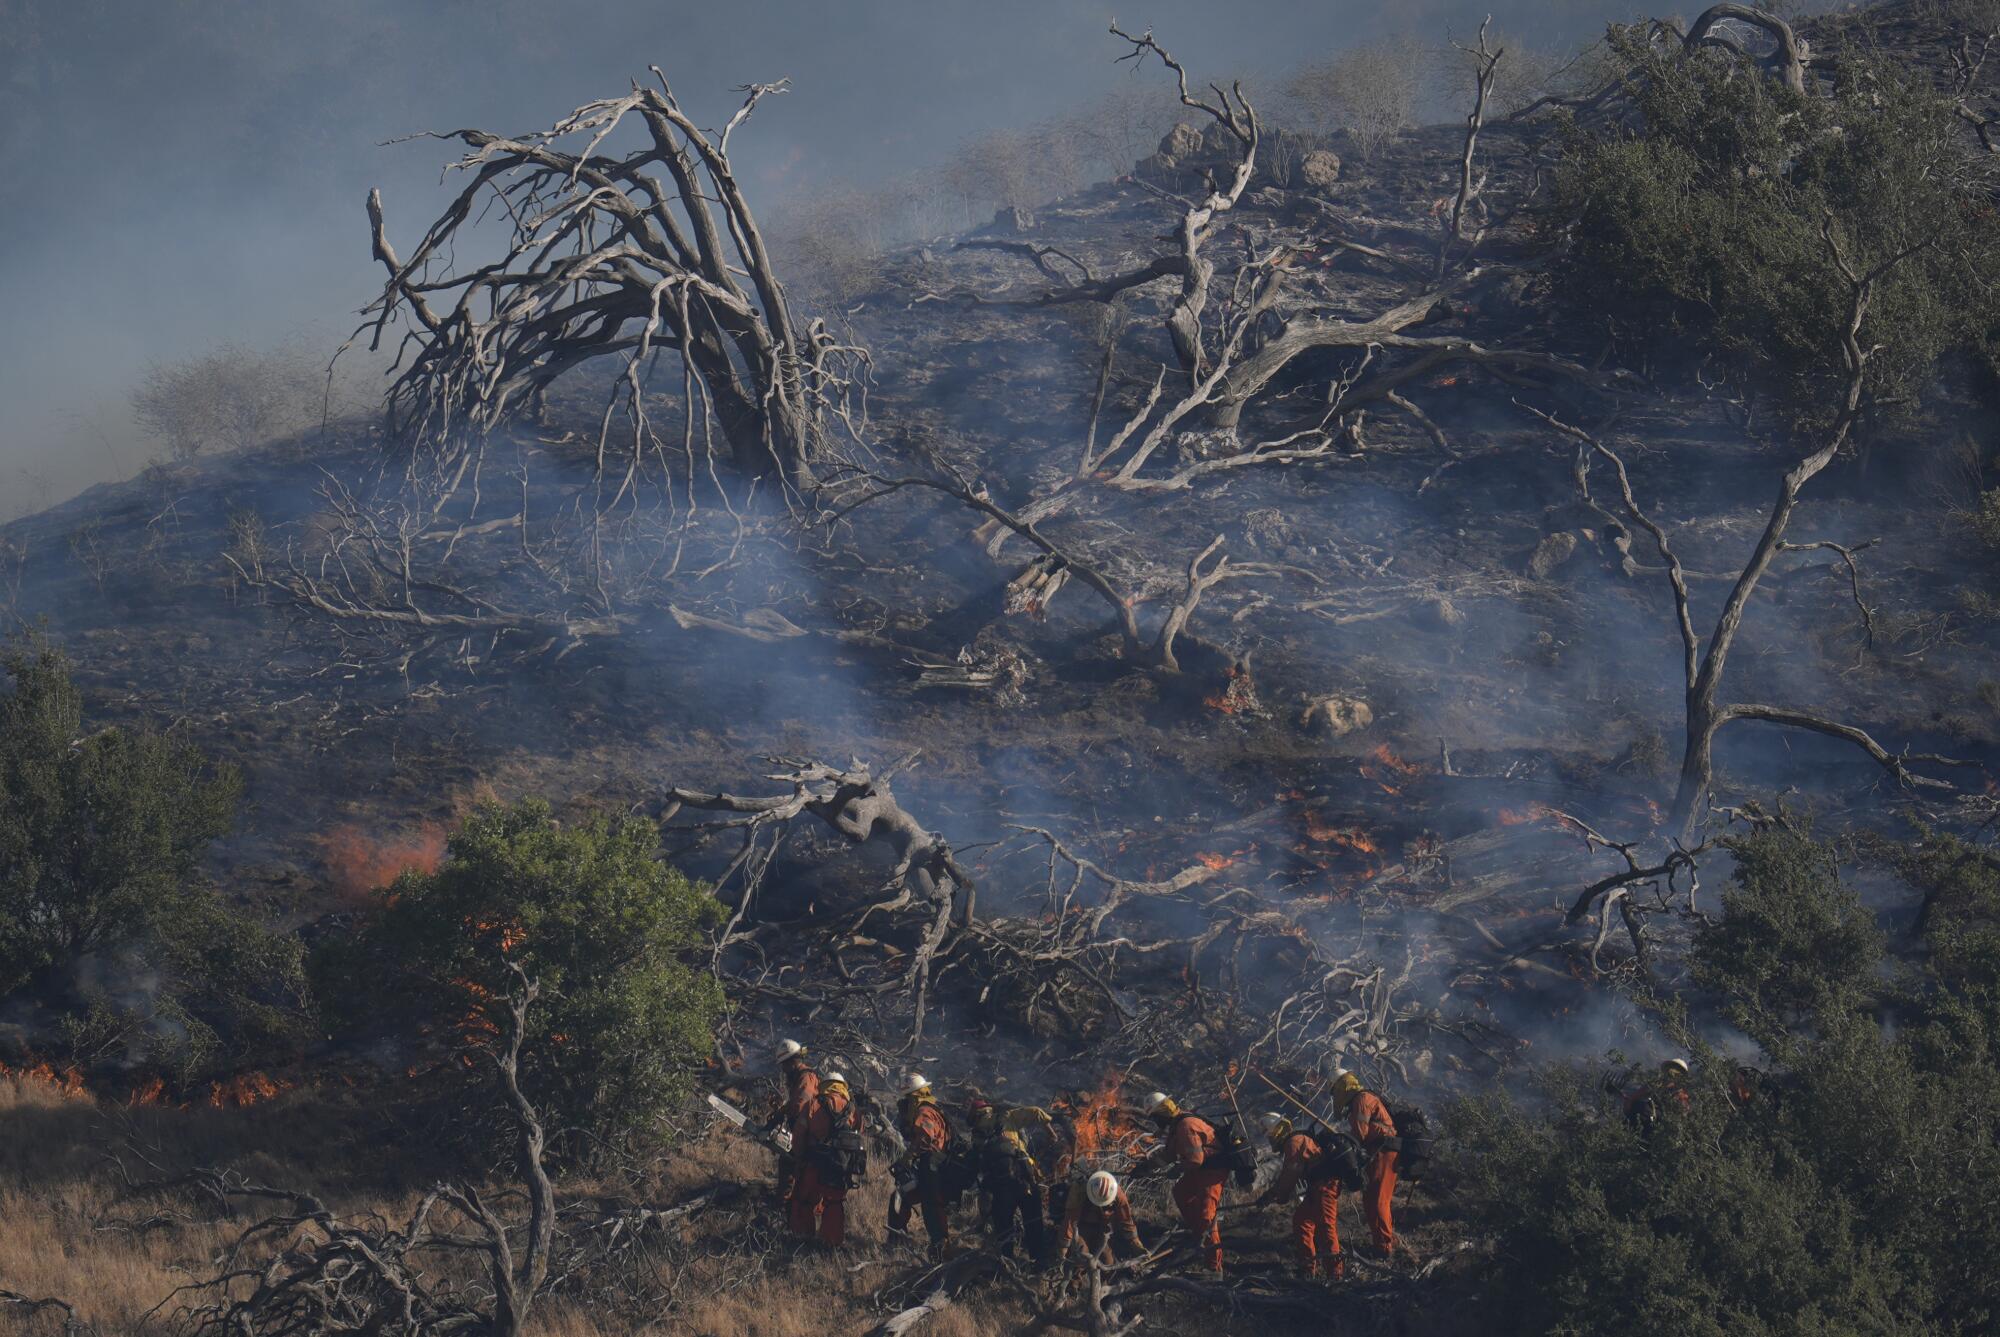 Firefighters work under a smoky hillside left by the Post Fire 